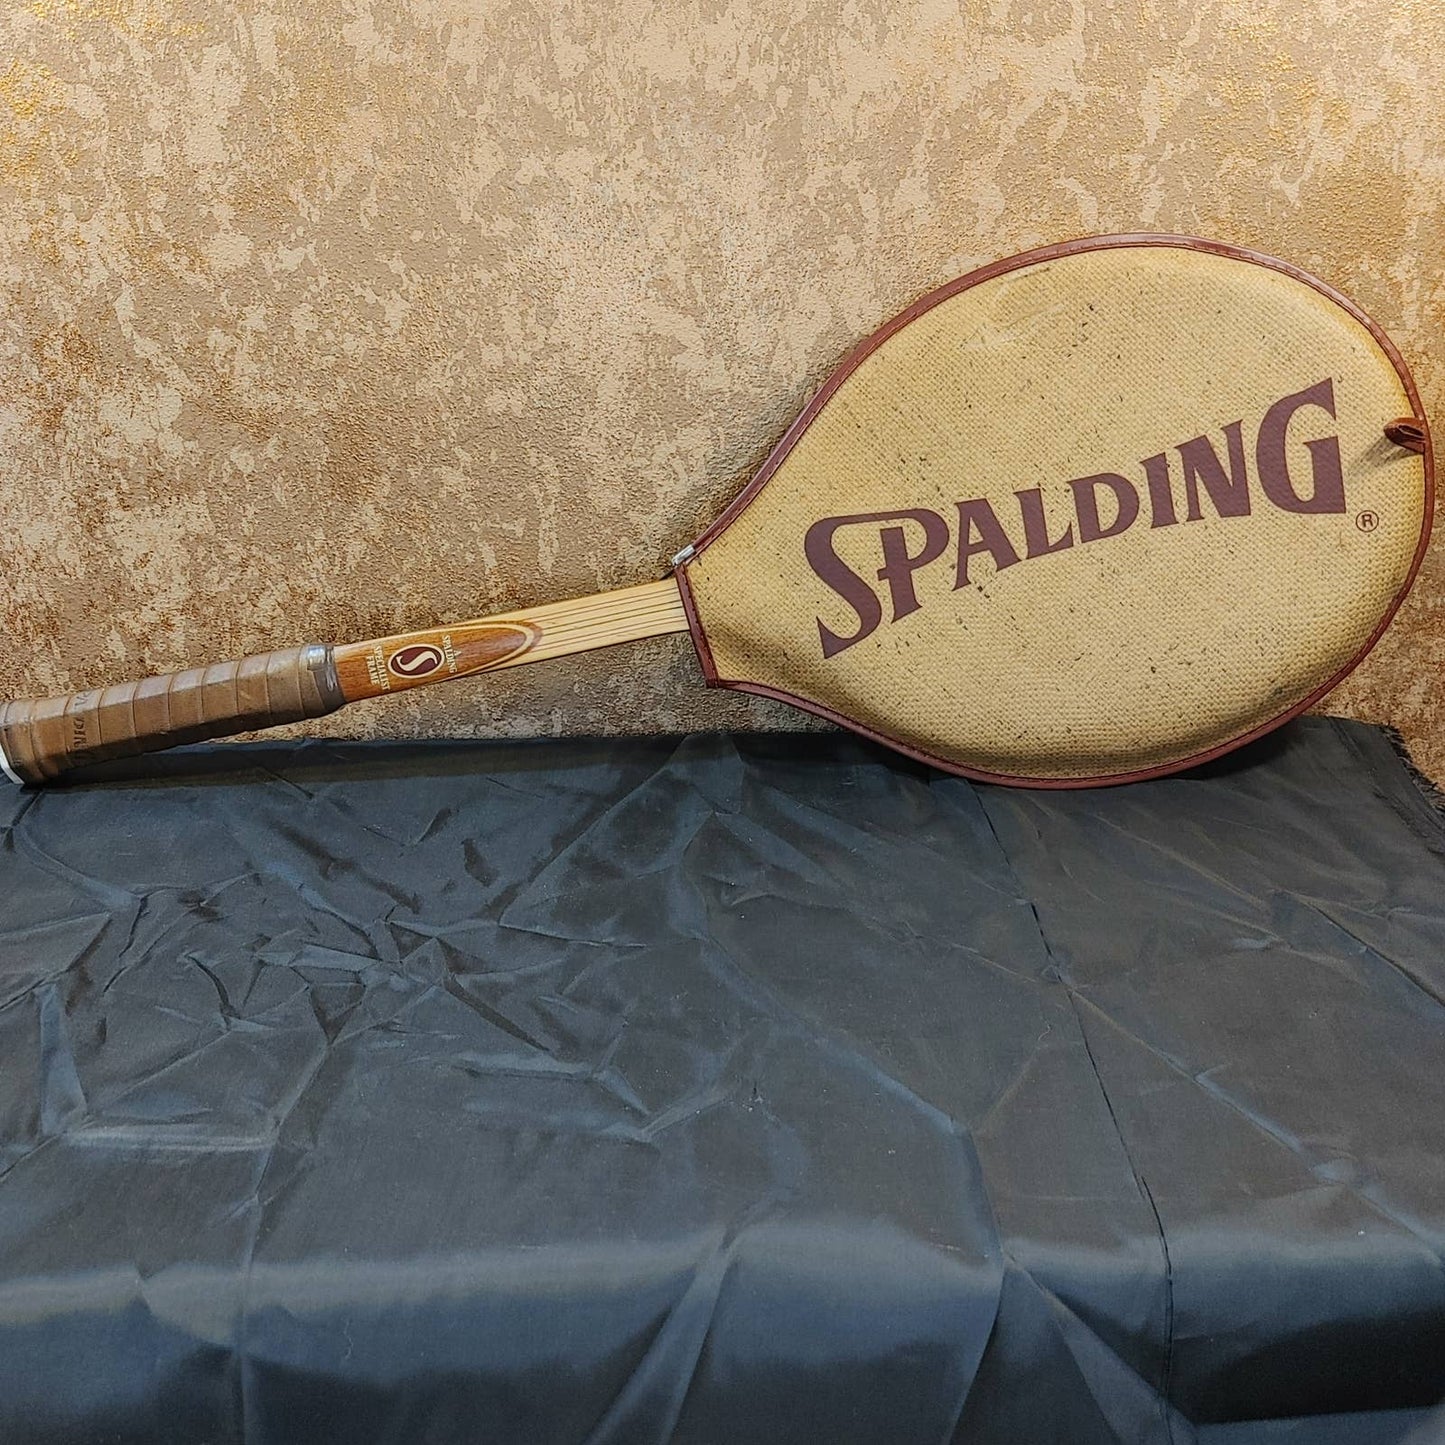 What a Racquet! Vintage Spalding Natural Wood Tennis Cover Excellent Free Ship!